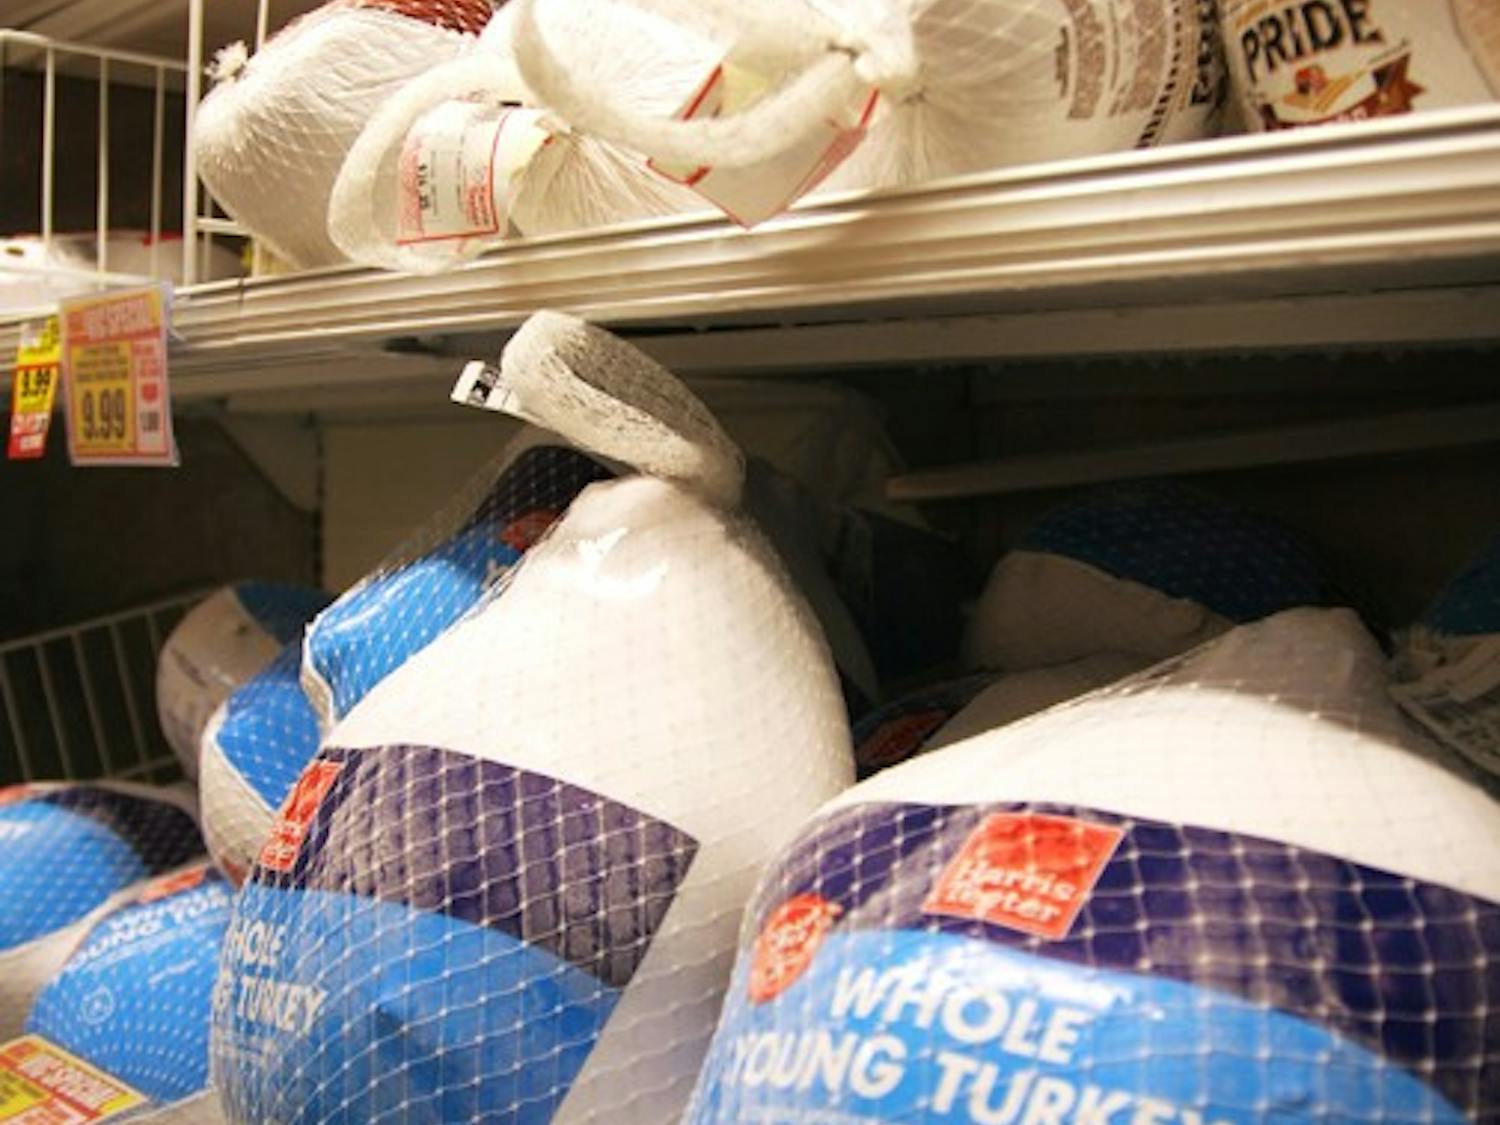 Frozen turkeys for sale on the shelves at Harris Teeter in Carrboro on Monday in preparation for Thanksgiving.